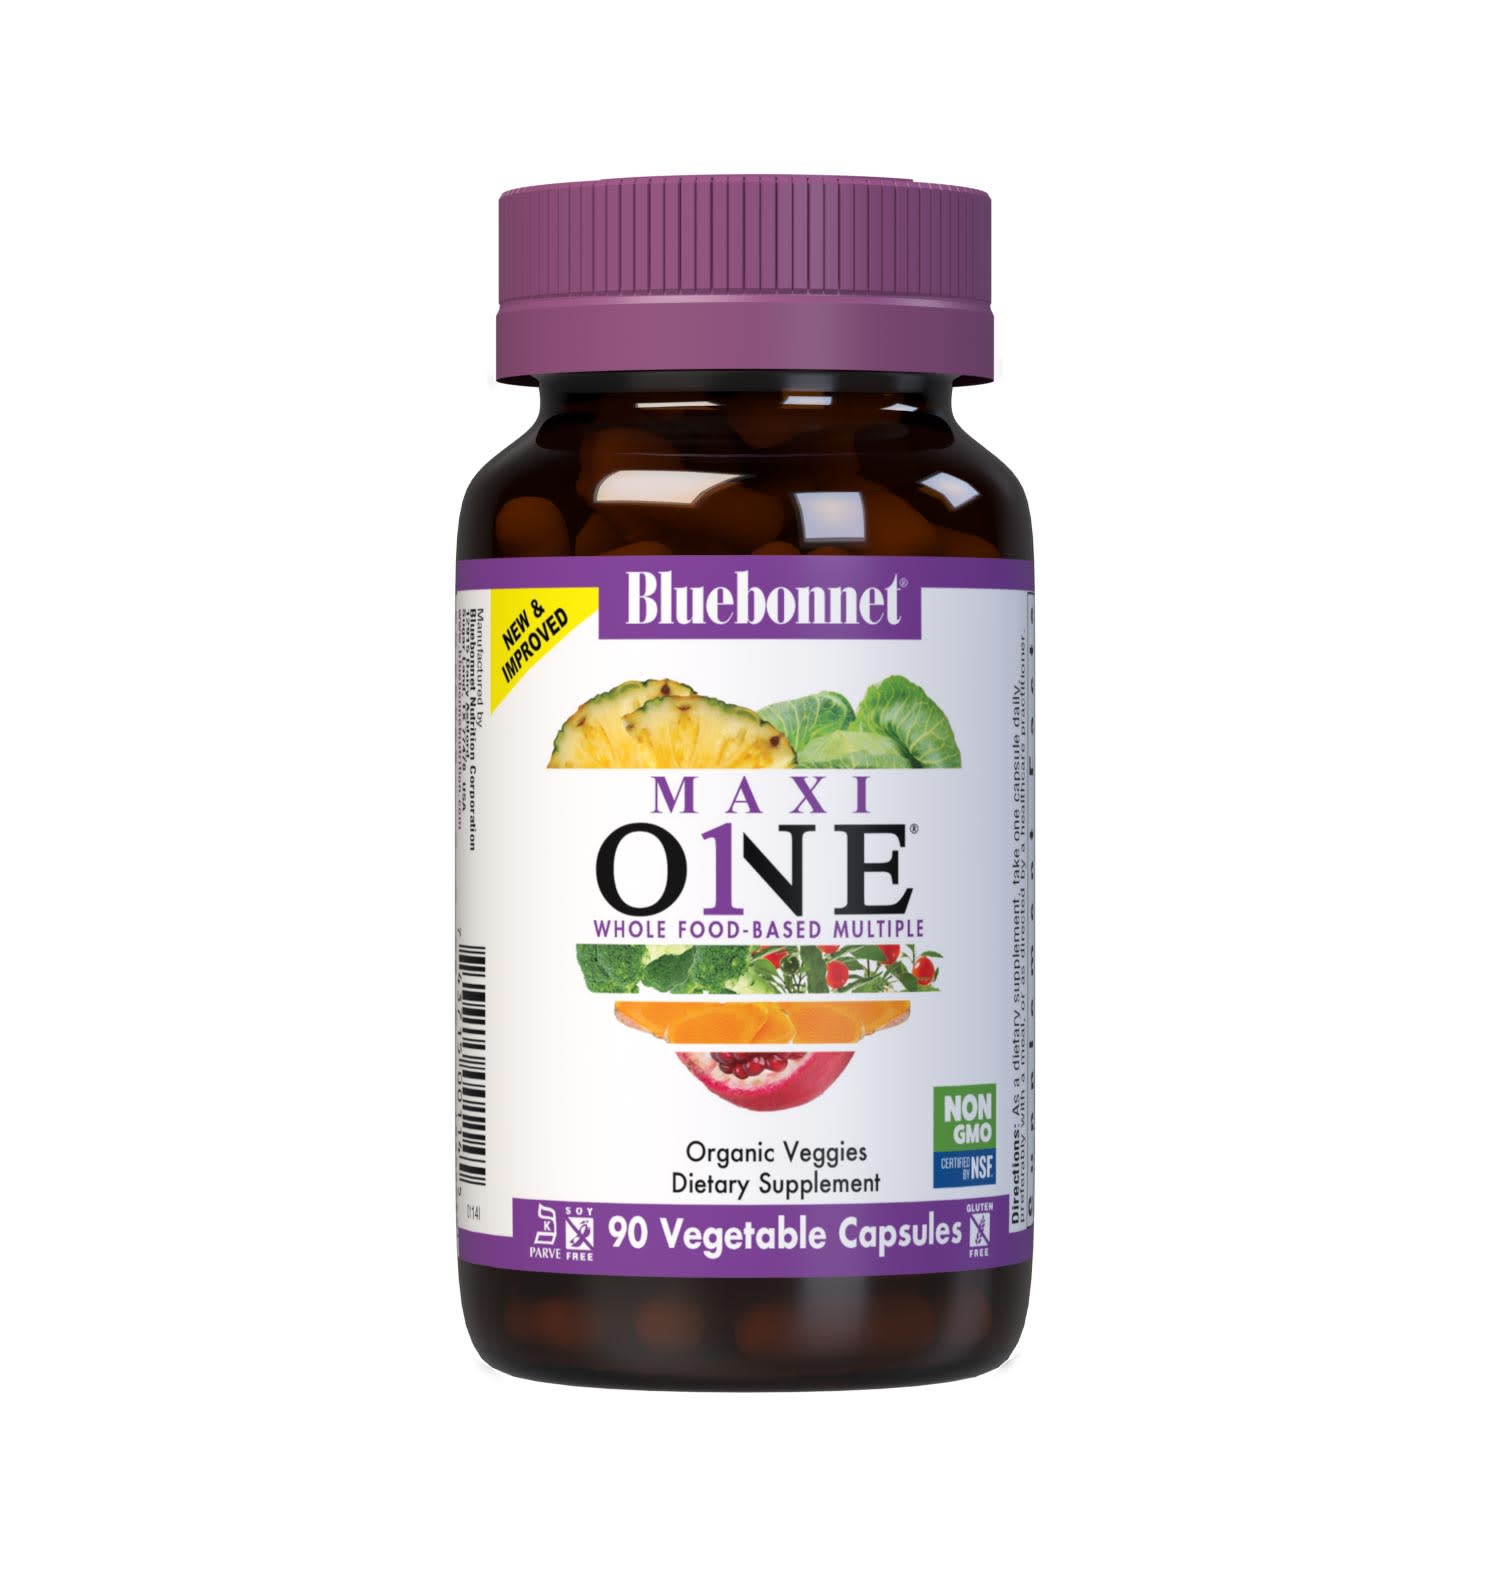 Bluebonnet’s Maxi ONE formula 90 Vegetable Capsules is a higher potency, single daily multivitamin and multimineral dietary supplement in a capsule and is formulated with highly efficient patented Albion chelated minerals, vitamin K2 from natto, select coenzyme B vitamins along with energy & vitality, organic whole food, and plant source enzyme blends. #size_90 count